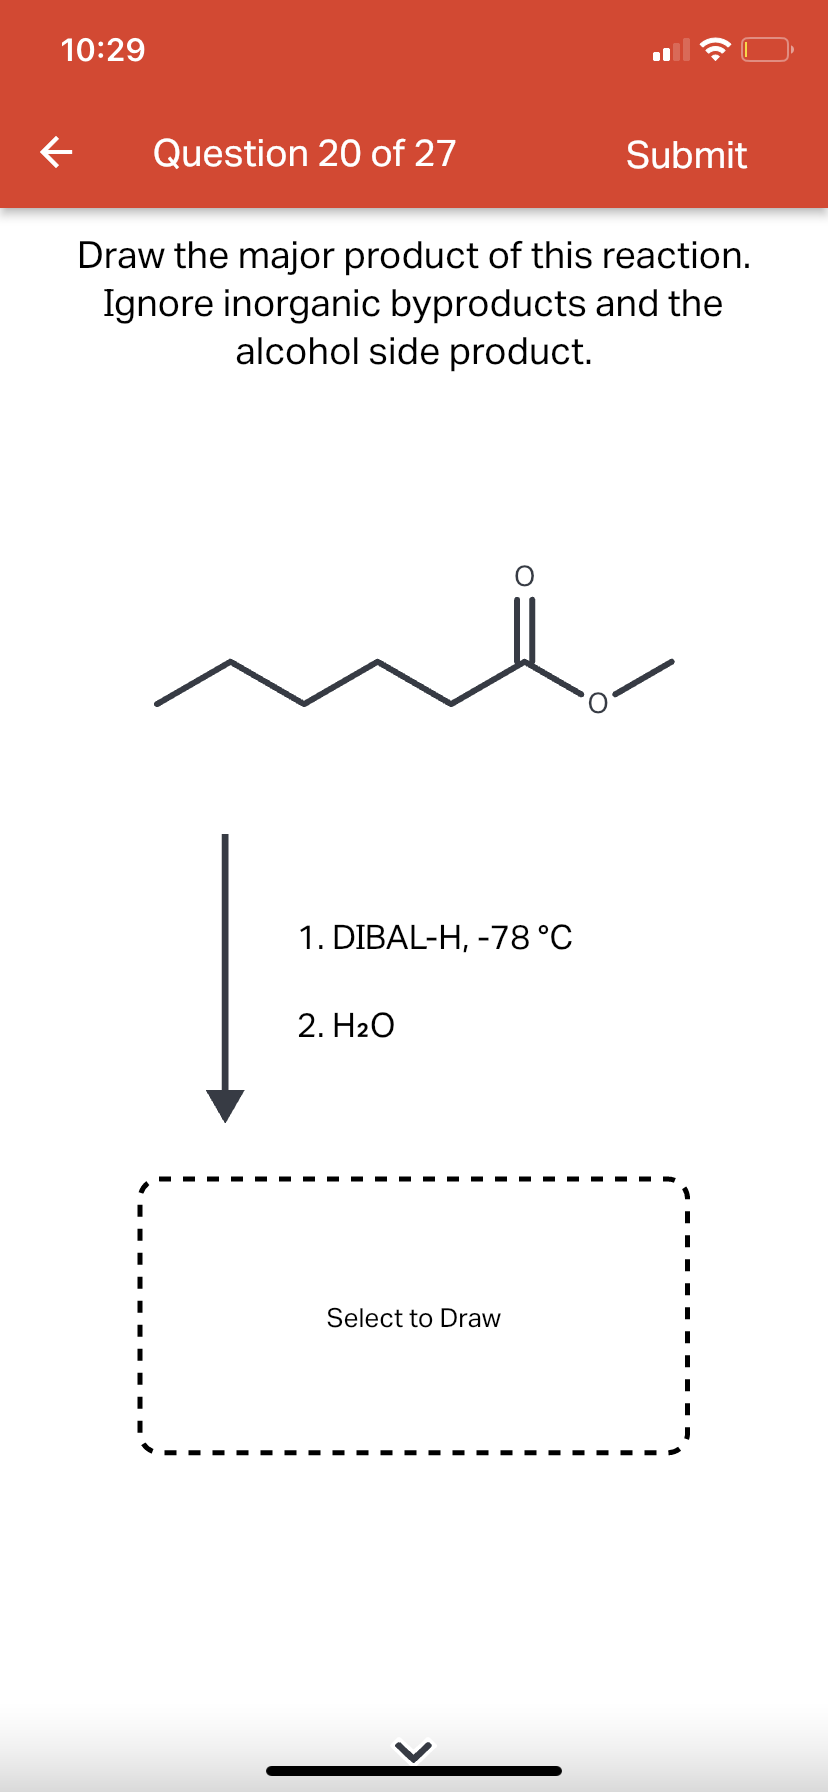 10:29
←
Question 20 of 27
Draw the major product of this reaction.
Ignore inorganic byproducts and the
alcohol side product.
1. DIBAL-H, -78 °C
2. H₂O
Submit
Select to Draw